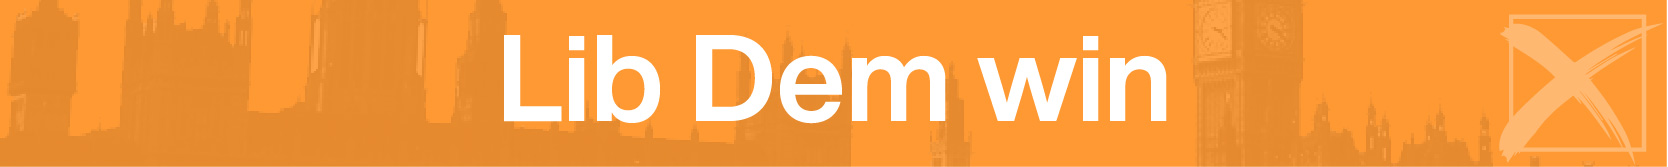 Banner graphic announcing a "Lib Dem win" in white writing against an orange background with a faded image of the Houses of Parliament.